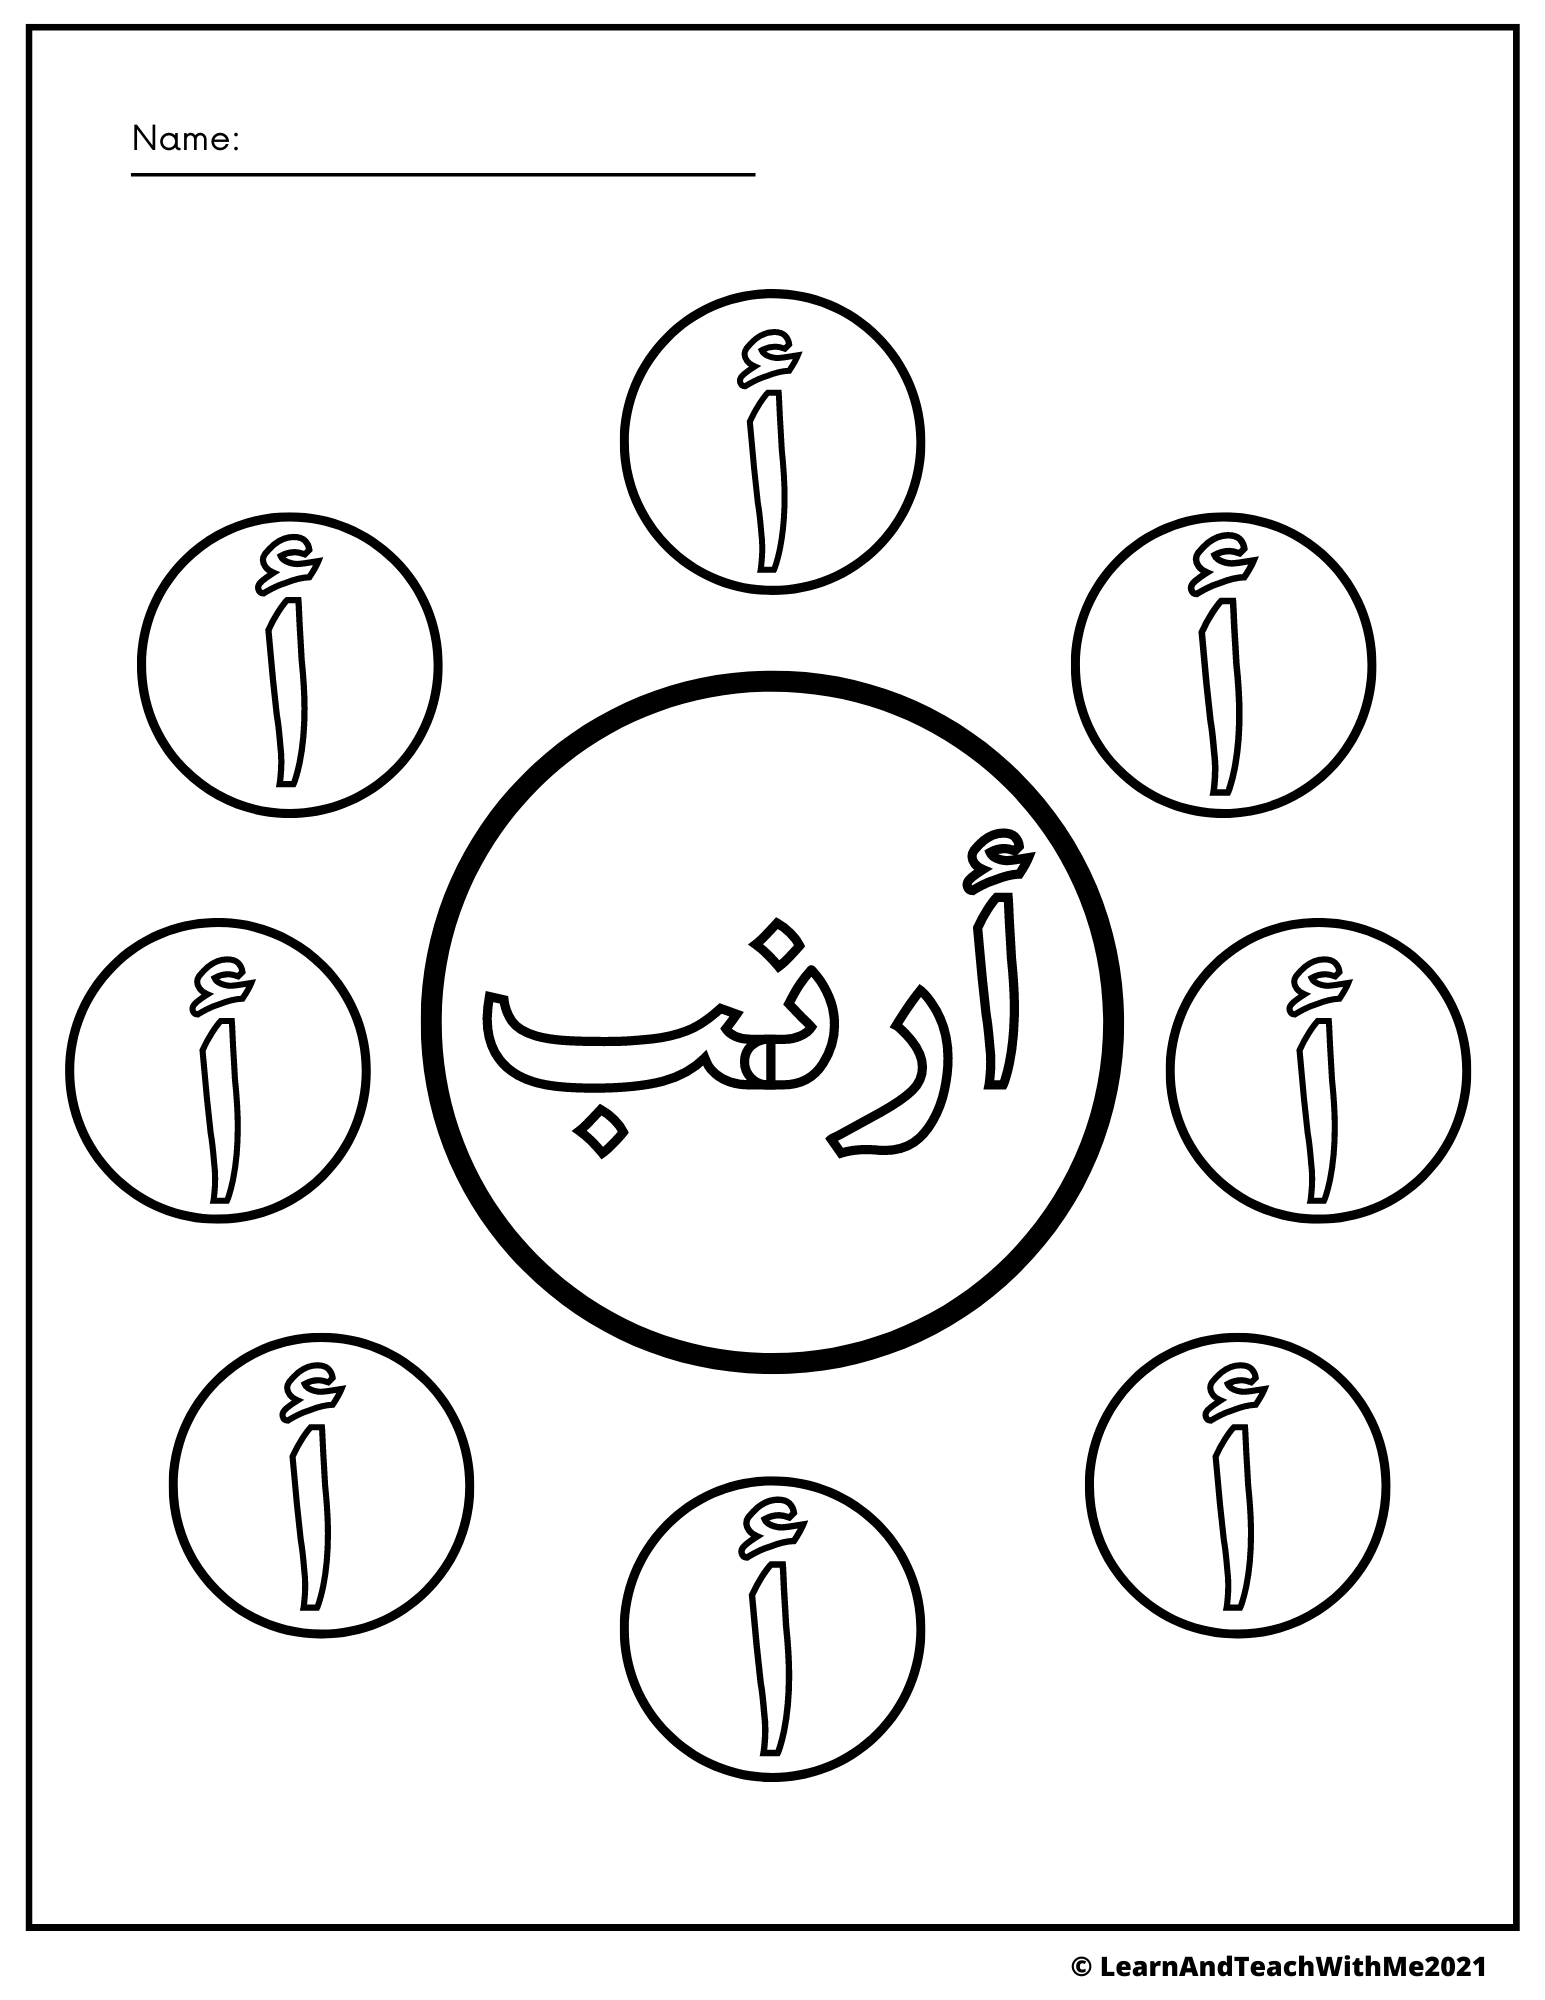 Arabic Letters and Words Coloring Pages - Made By Teachers